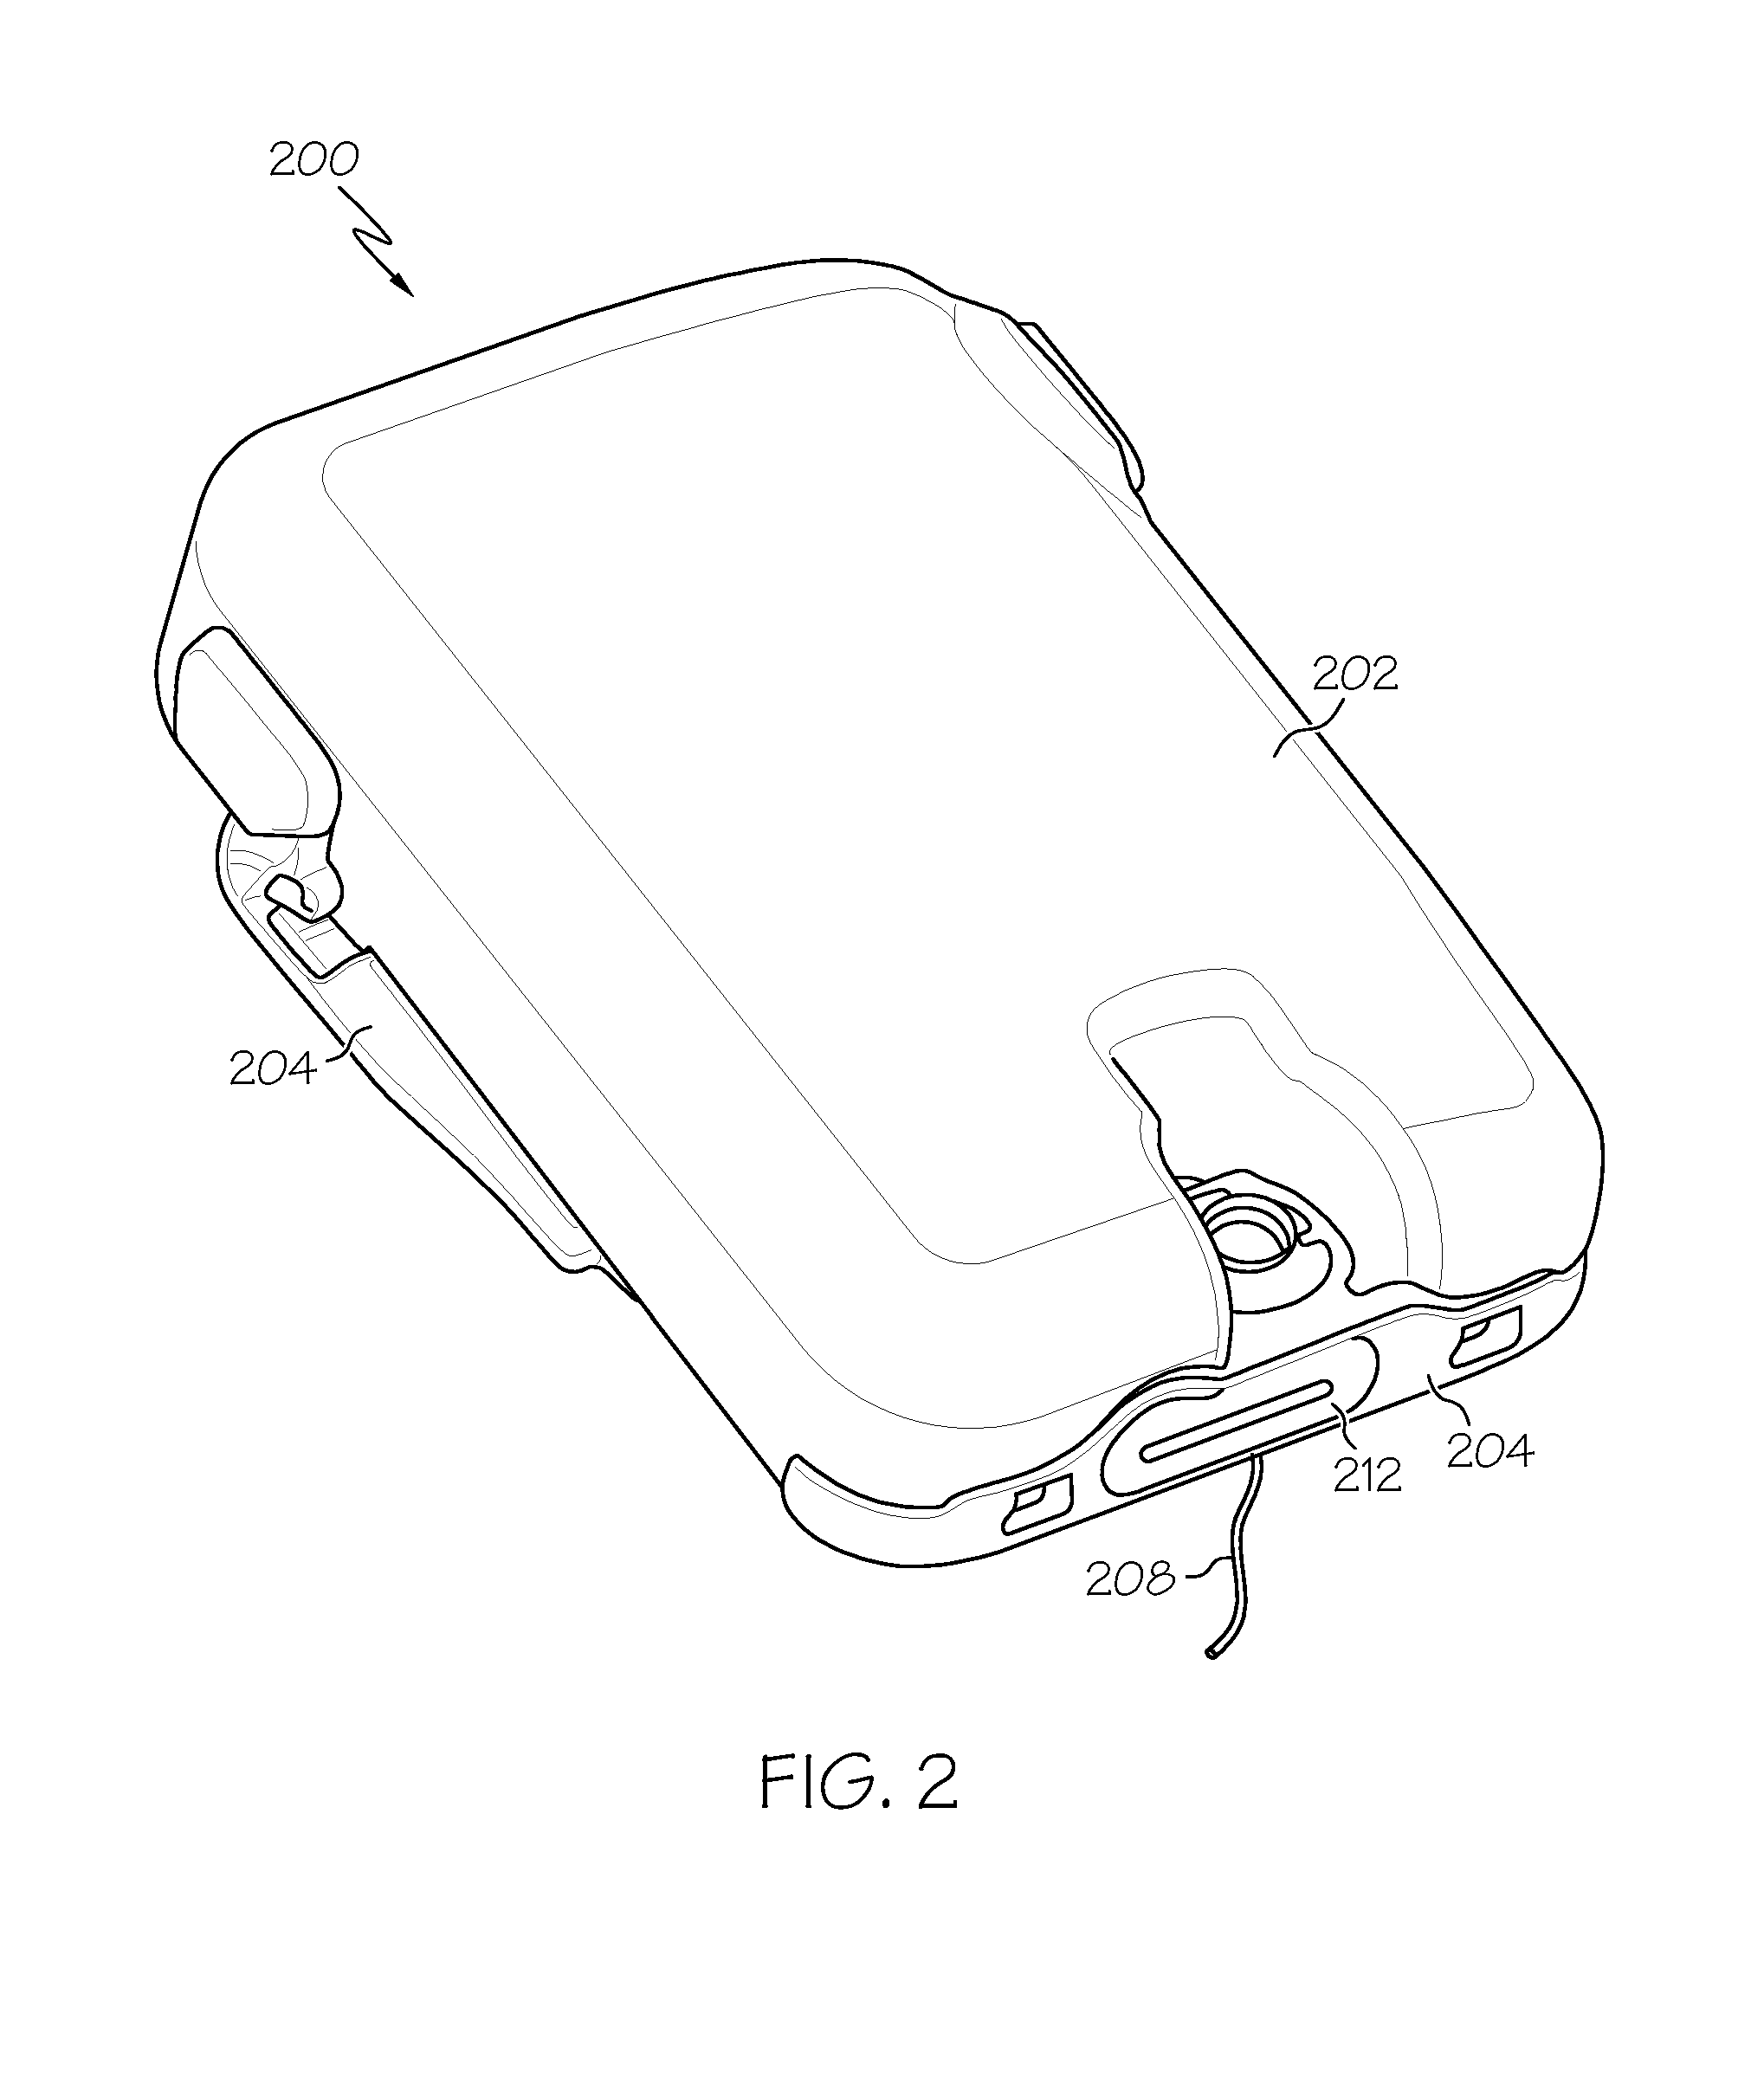 Motor health monitoring and medical device incorporating same